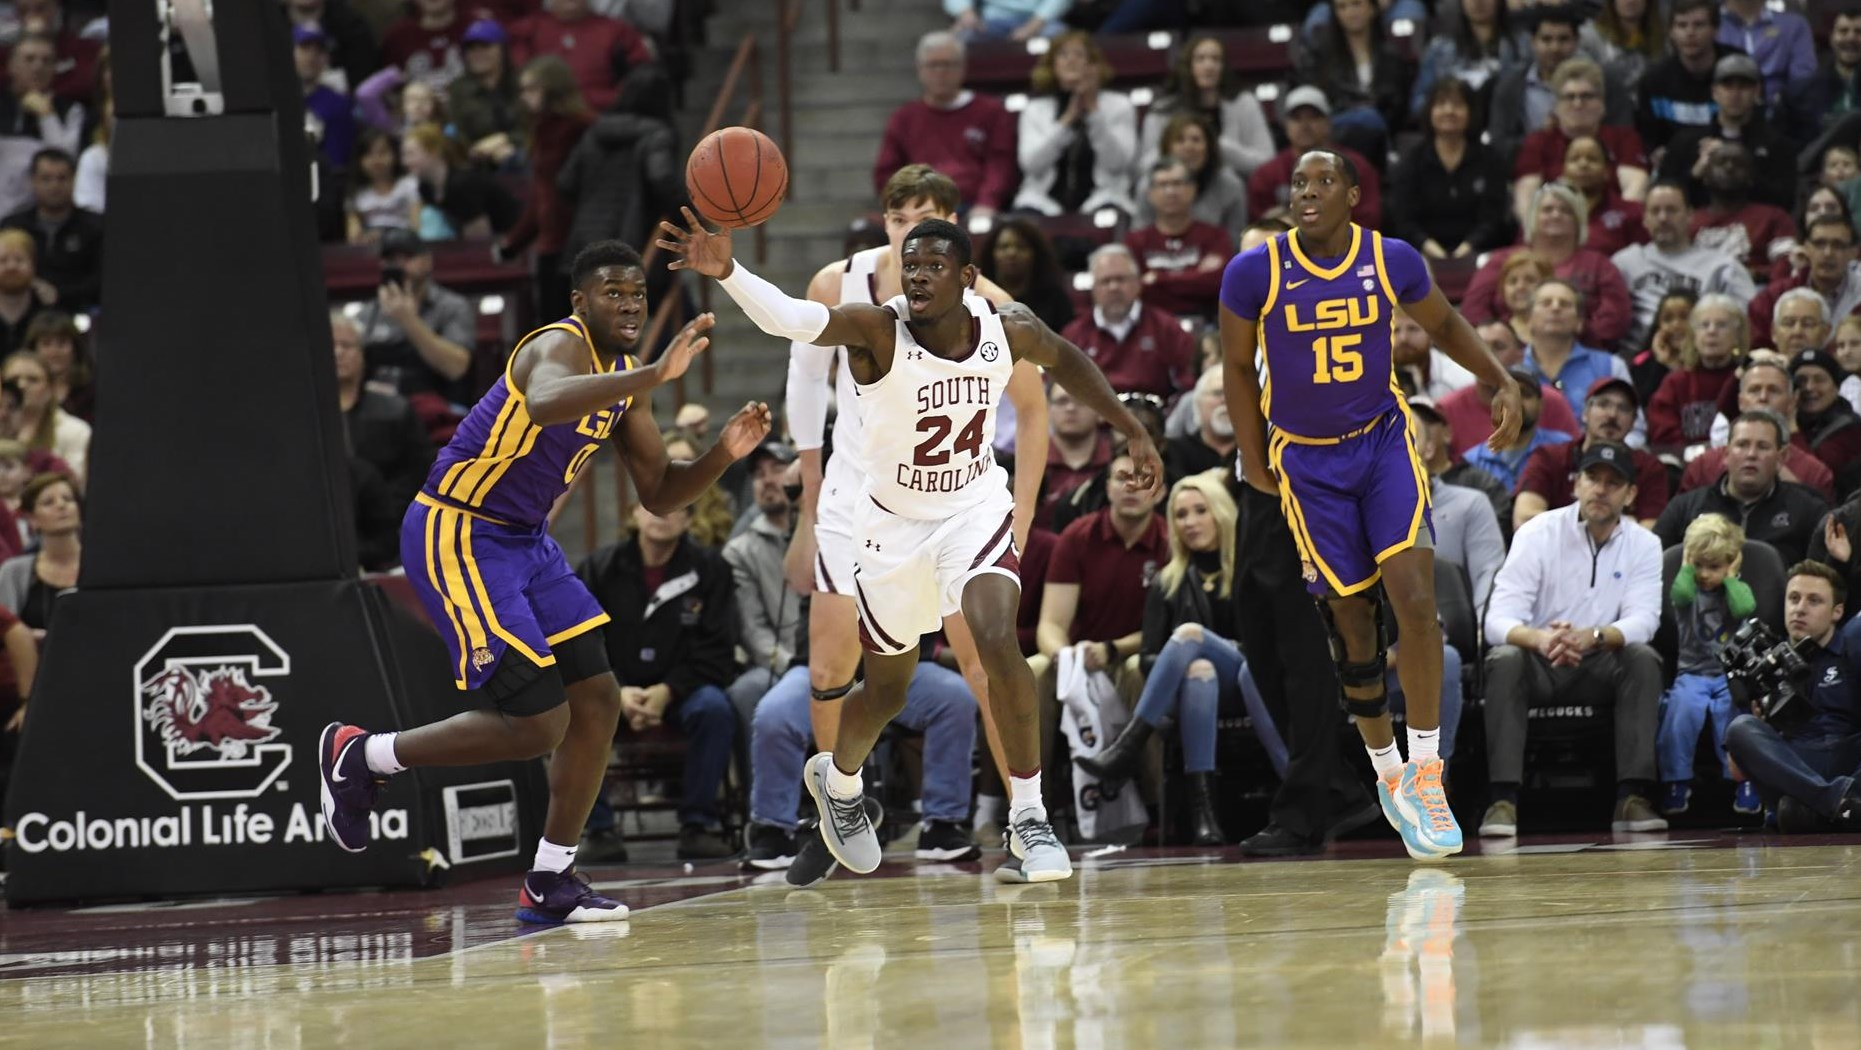 Gamecocks fall at home to LSU, 86-80